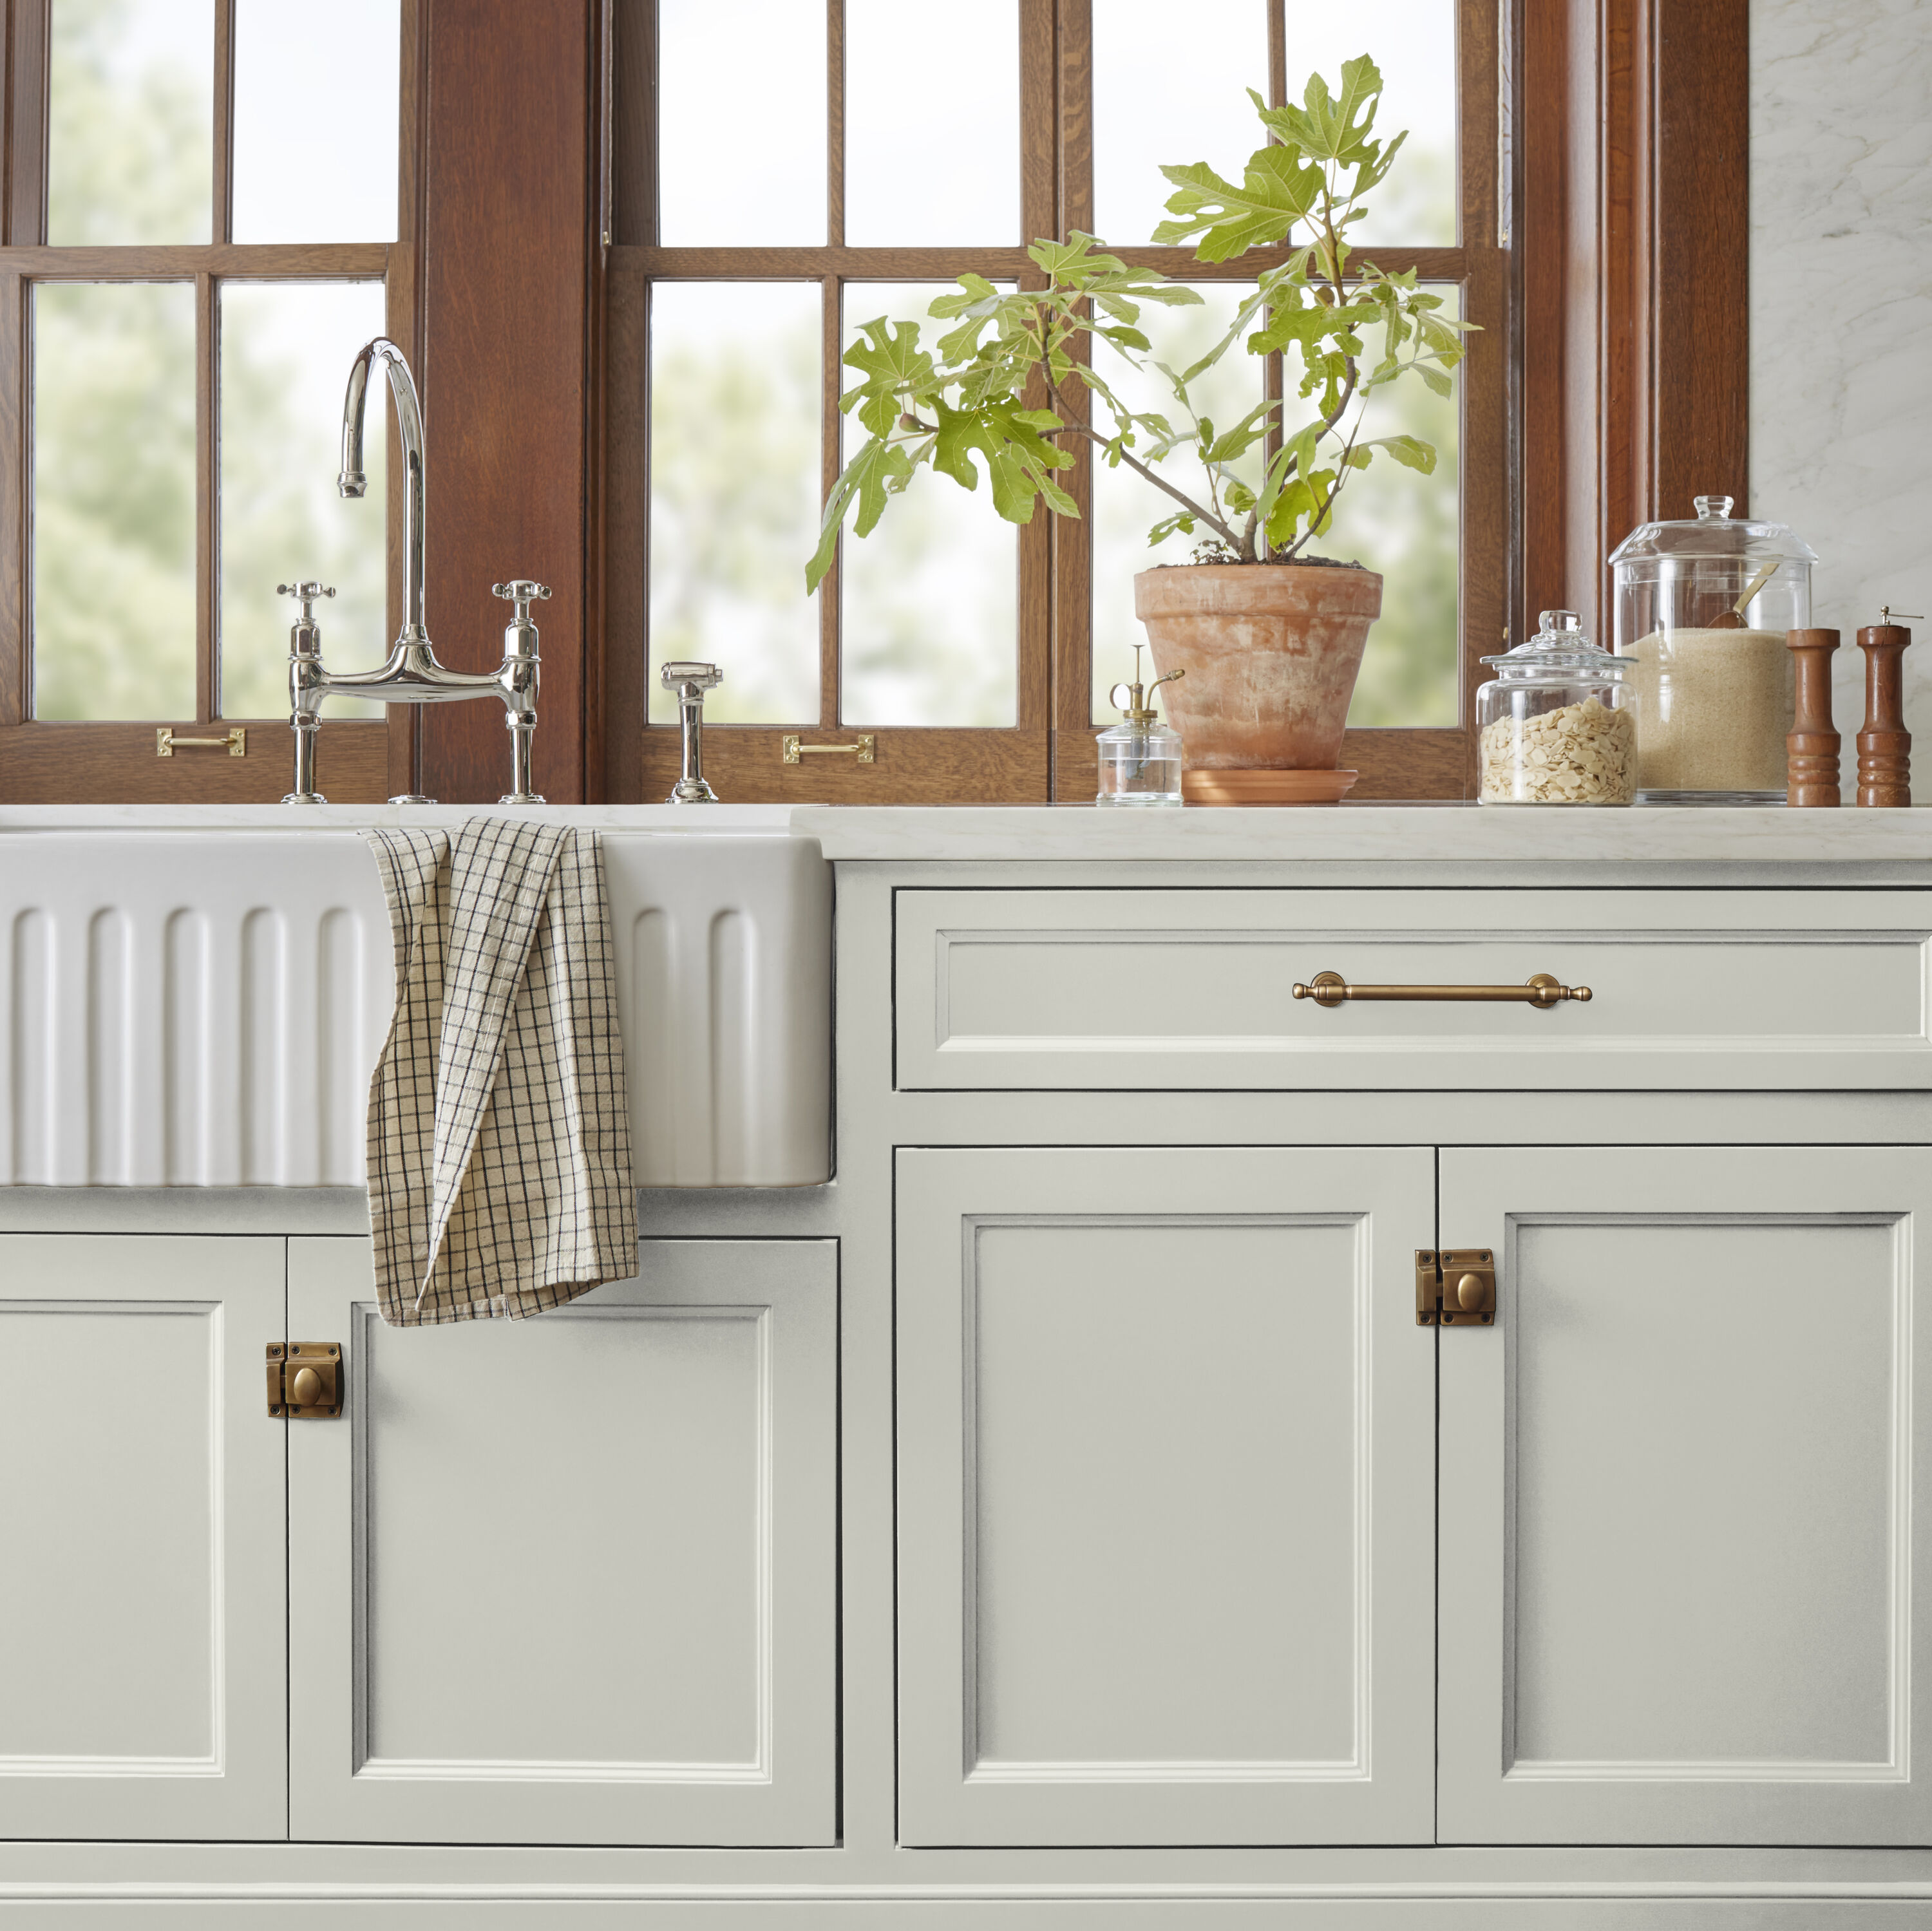 Our Hopeful Home: How To Install Farmhouse Kitchen Towel Bars